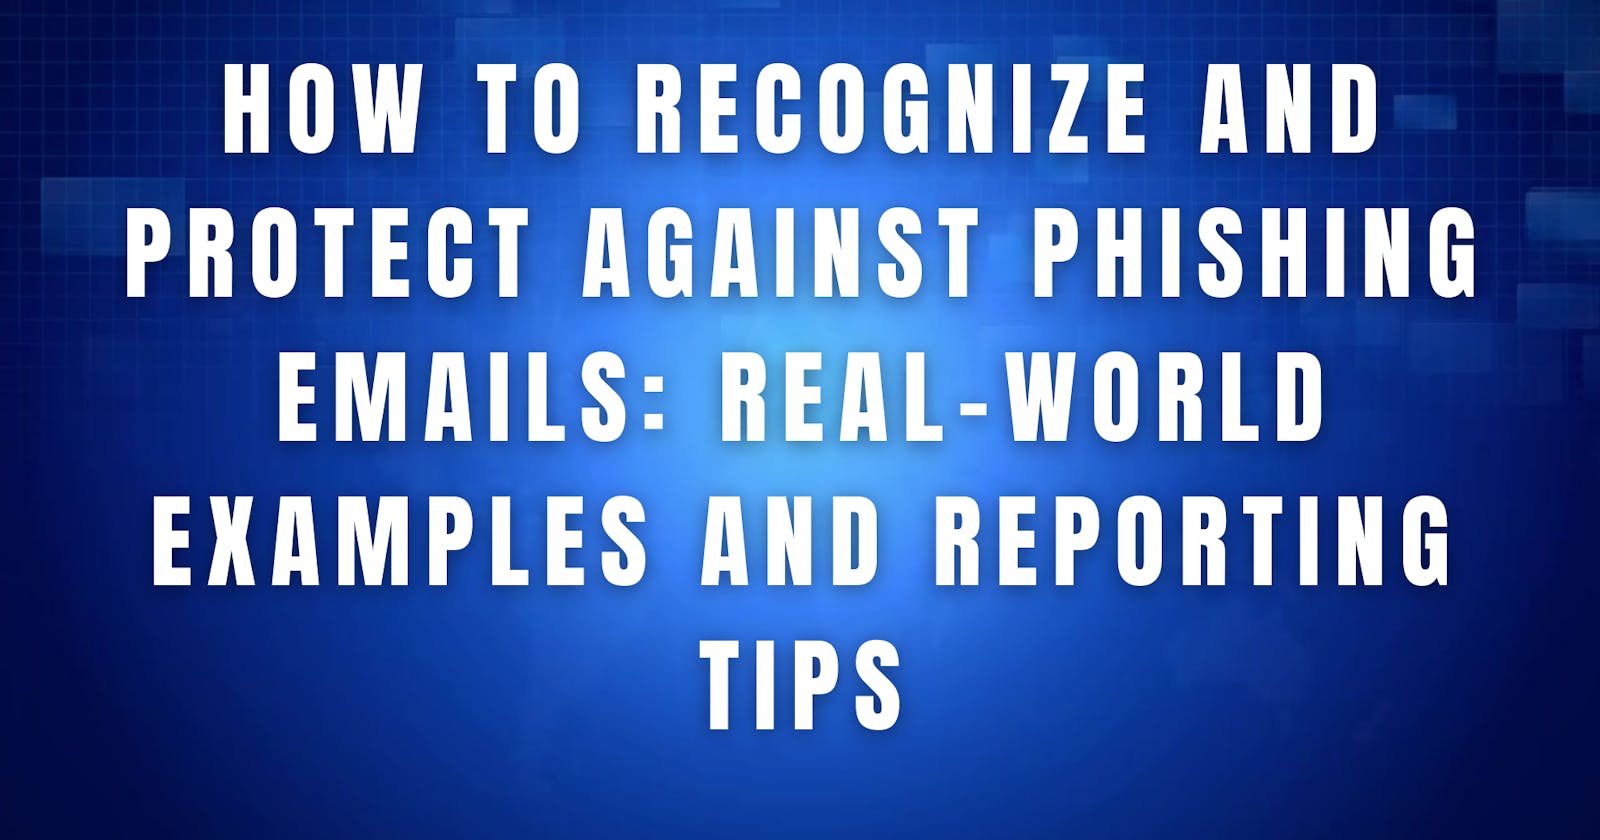 How to Recognize and Protect Against Phishing Emails: Real-World Examples and Reporting Tips